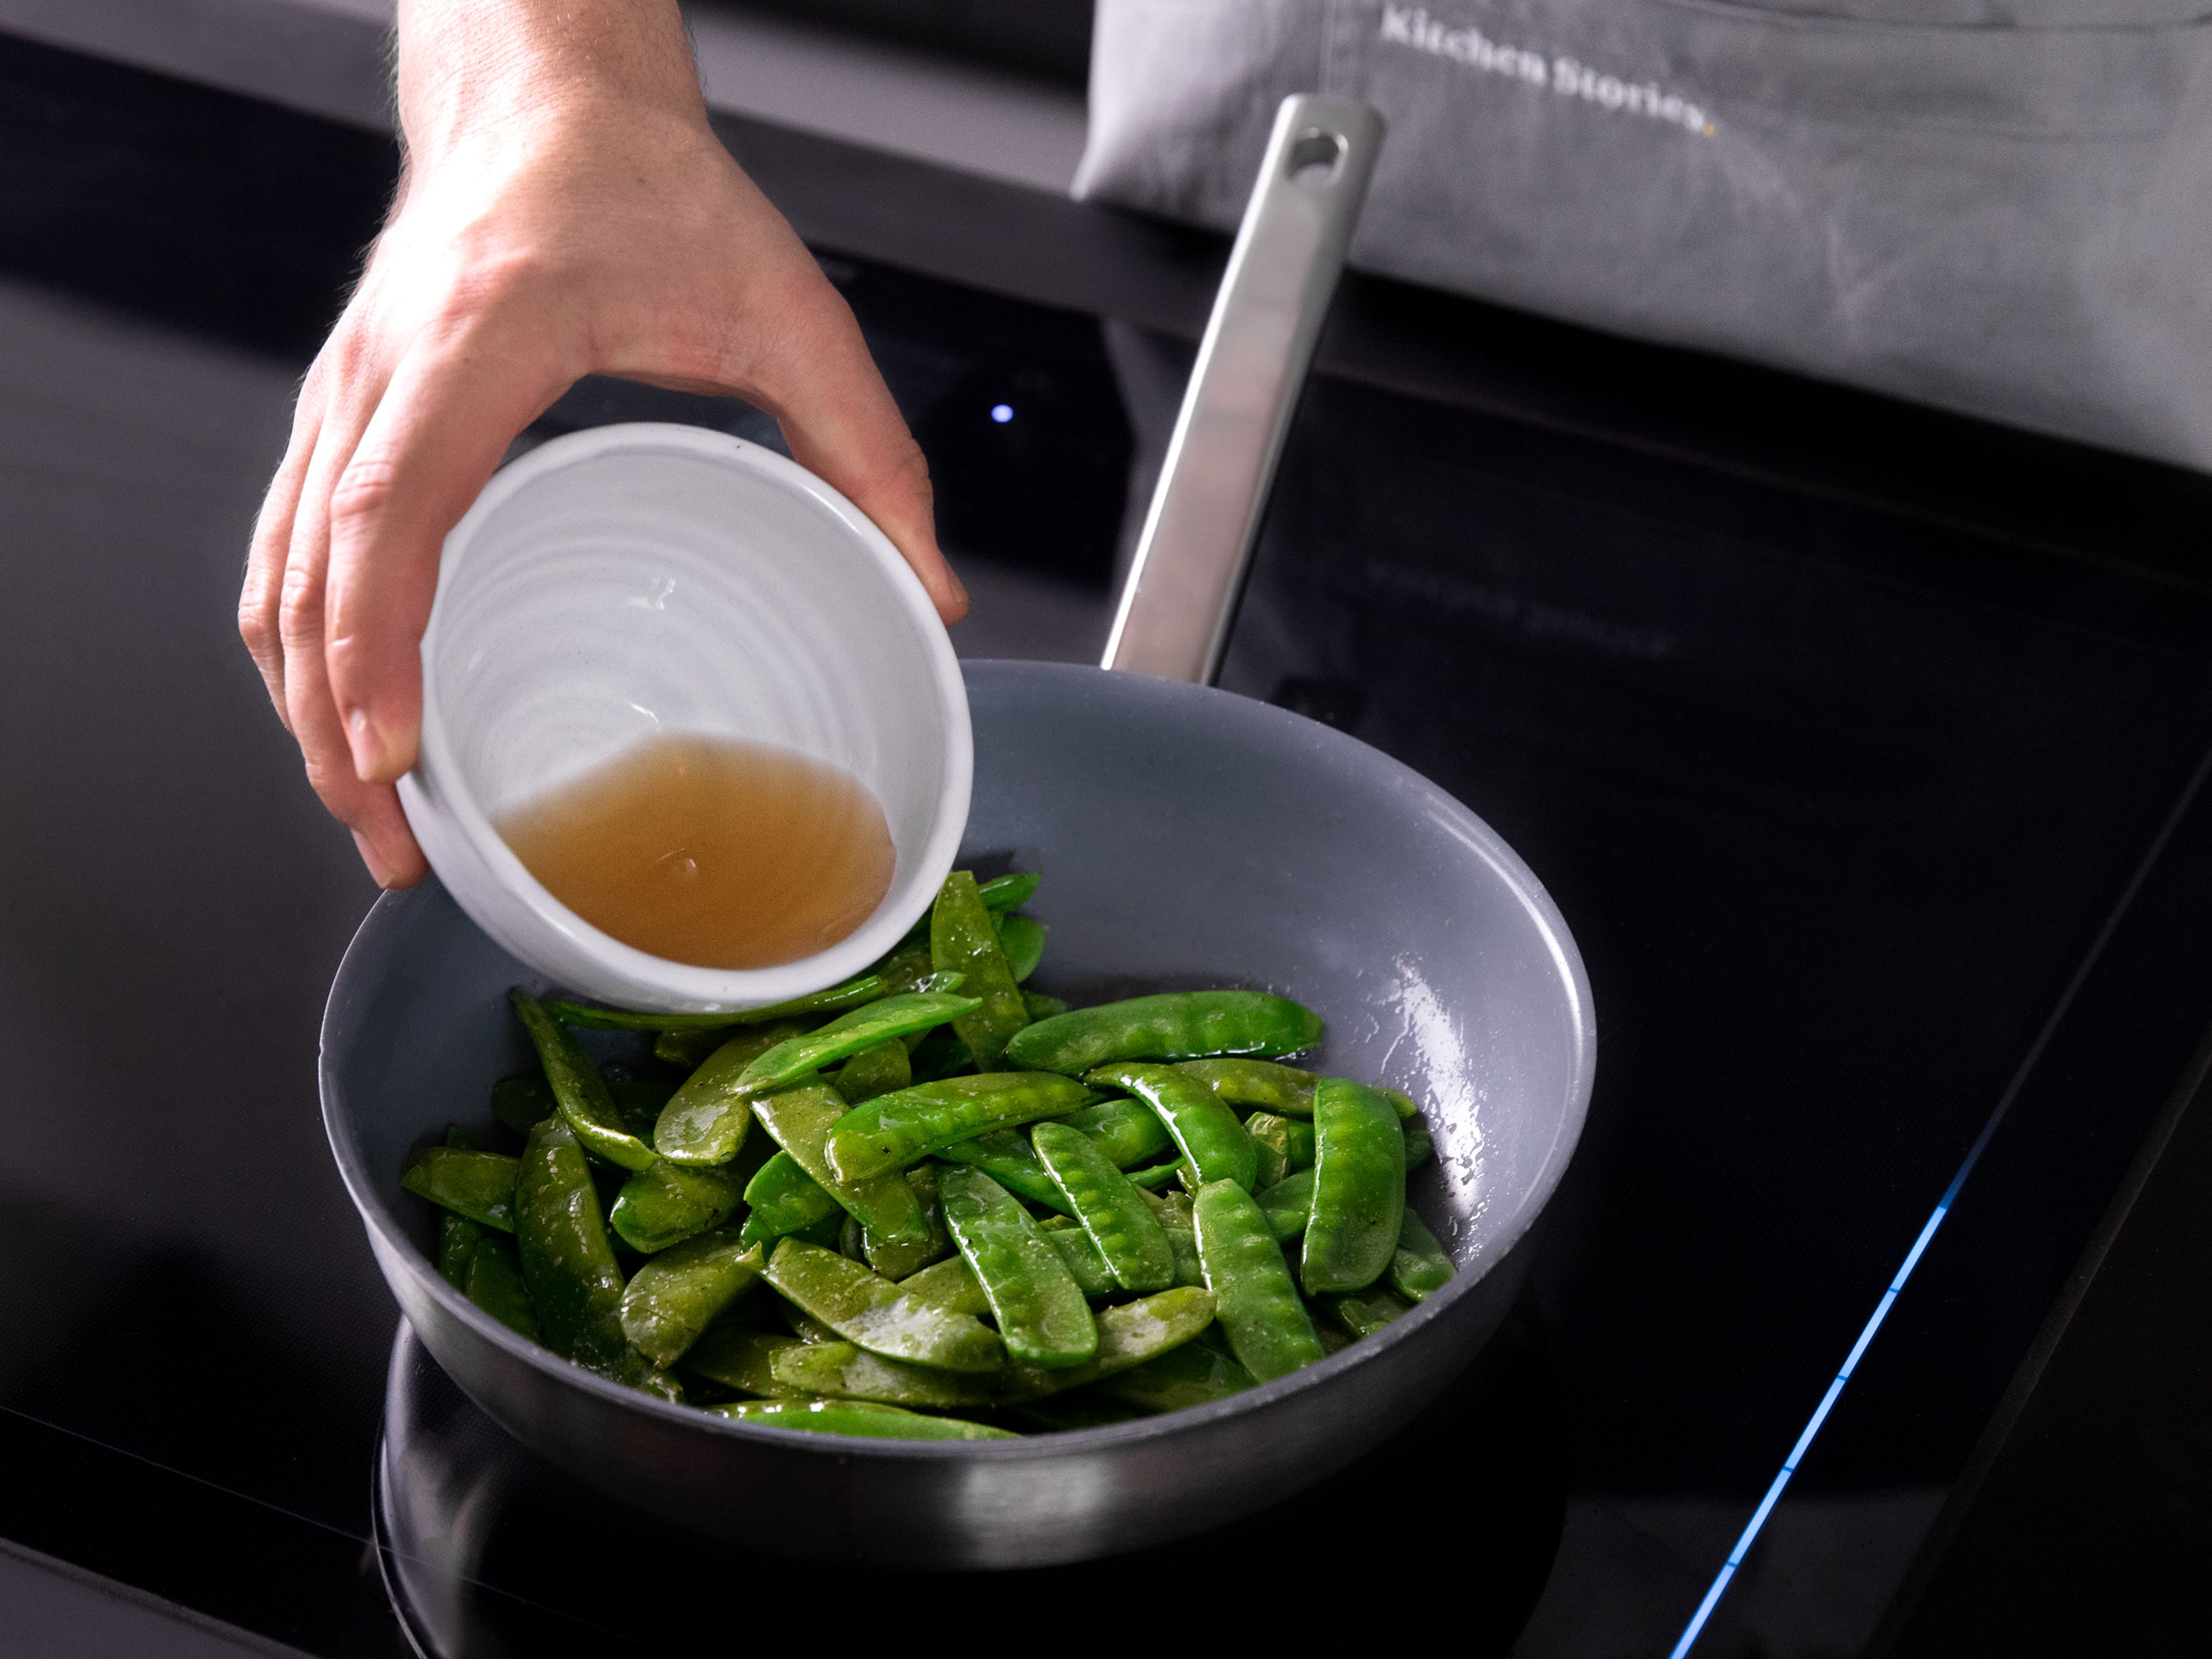 Melt remaining butter in a small frying pan and deglaze with remaining beef stock. Season with salt, pepper, and sugar. Bring to a simmer and add snow peas and cook for approx. 1 min. Take out beef, cut into slices, then add back to the pot of stew. Serve braised beef with snow peas. Enjoy!